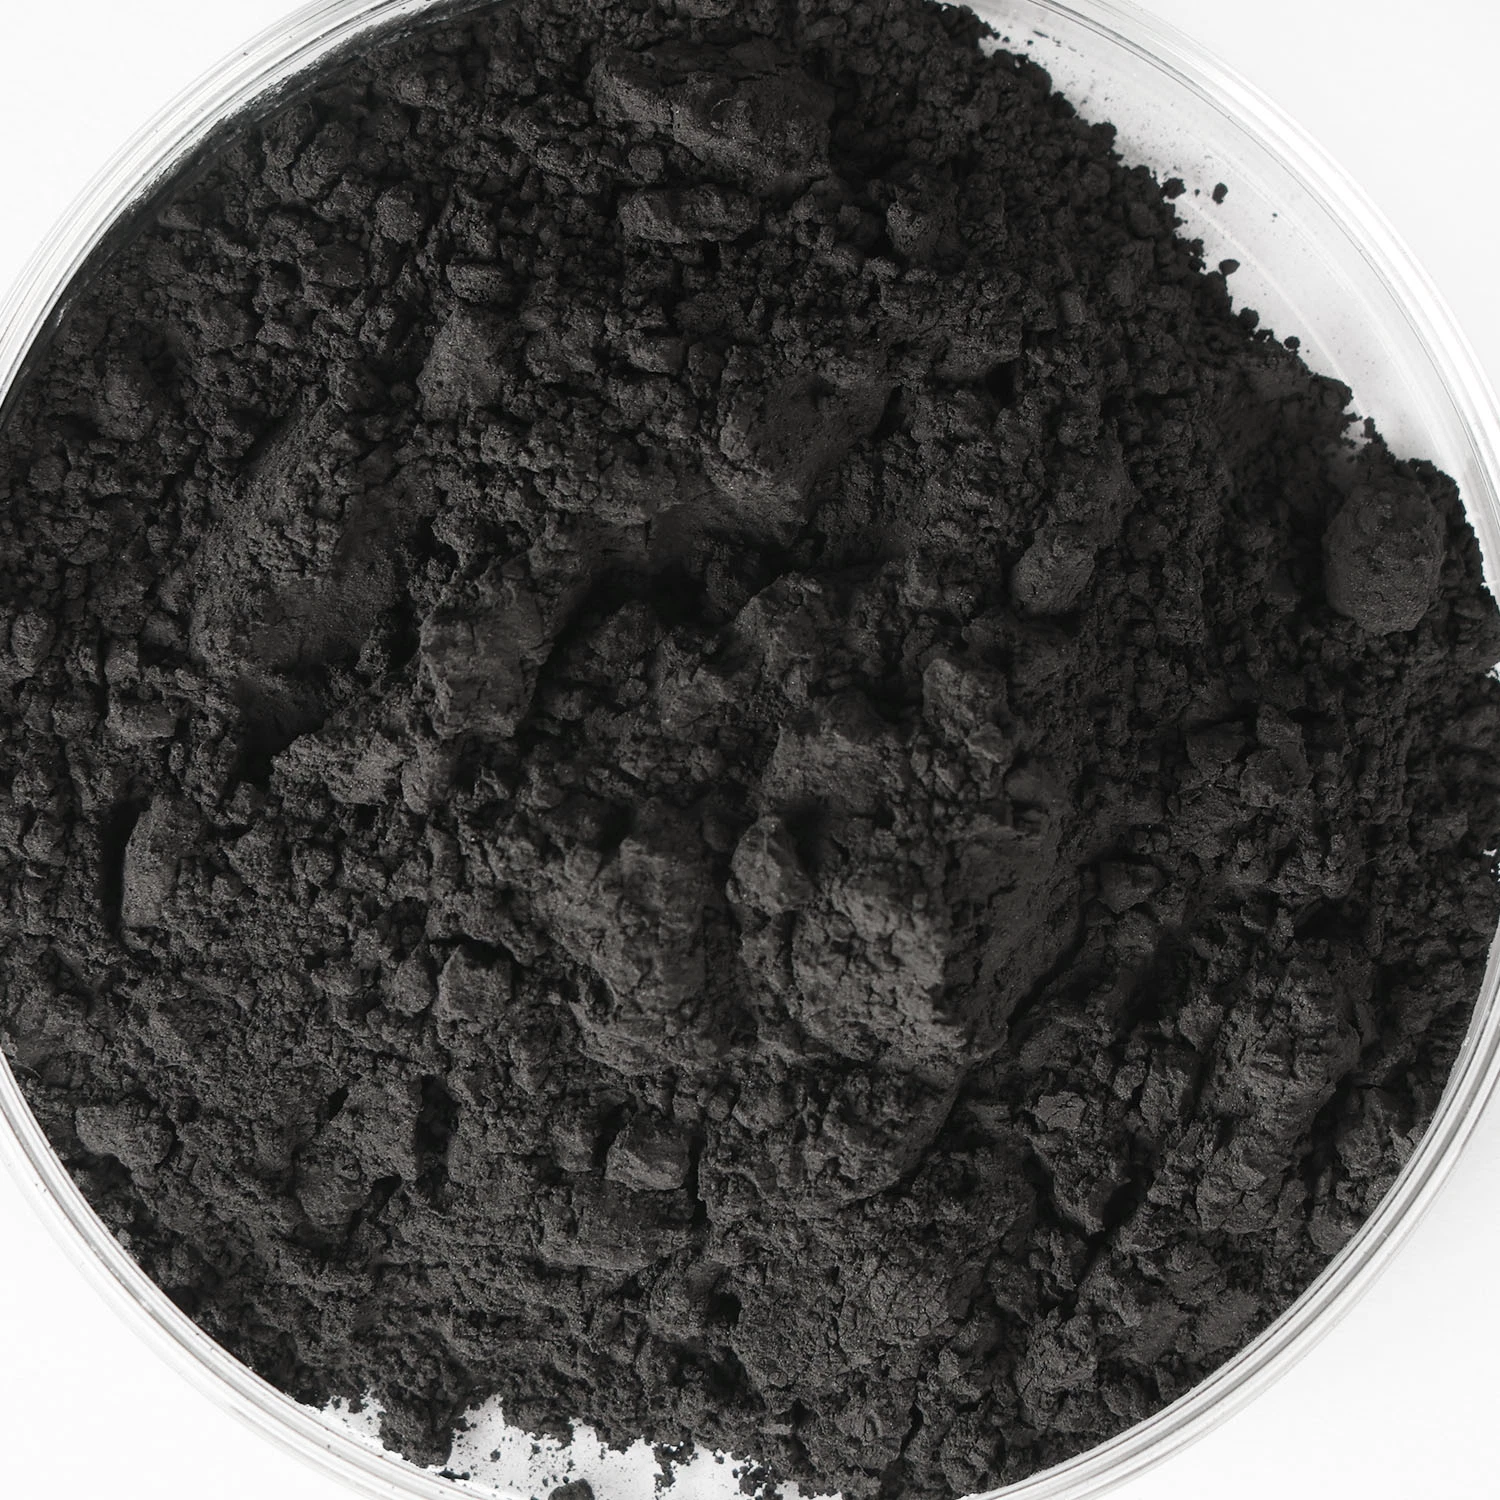 10 Percent Ash Content Black Wood Powder Activated Carbon Purposed in The Area of Cooking Oil Purification